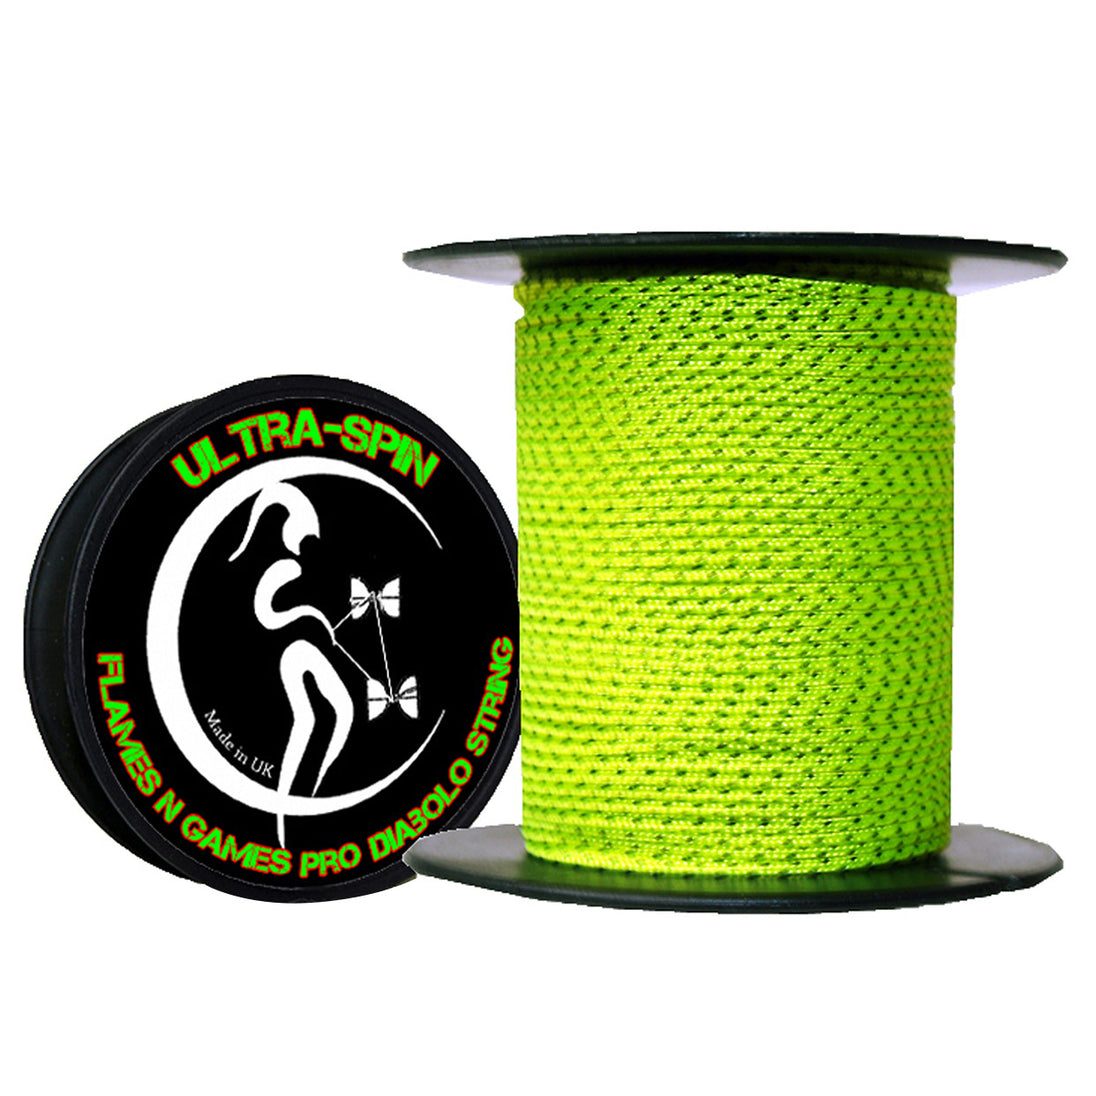 Flames N' Games ULTRA-SPIN Pro Diabolo String 25meter Reel Yellow and Black colour